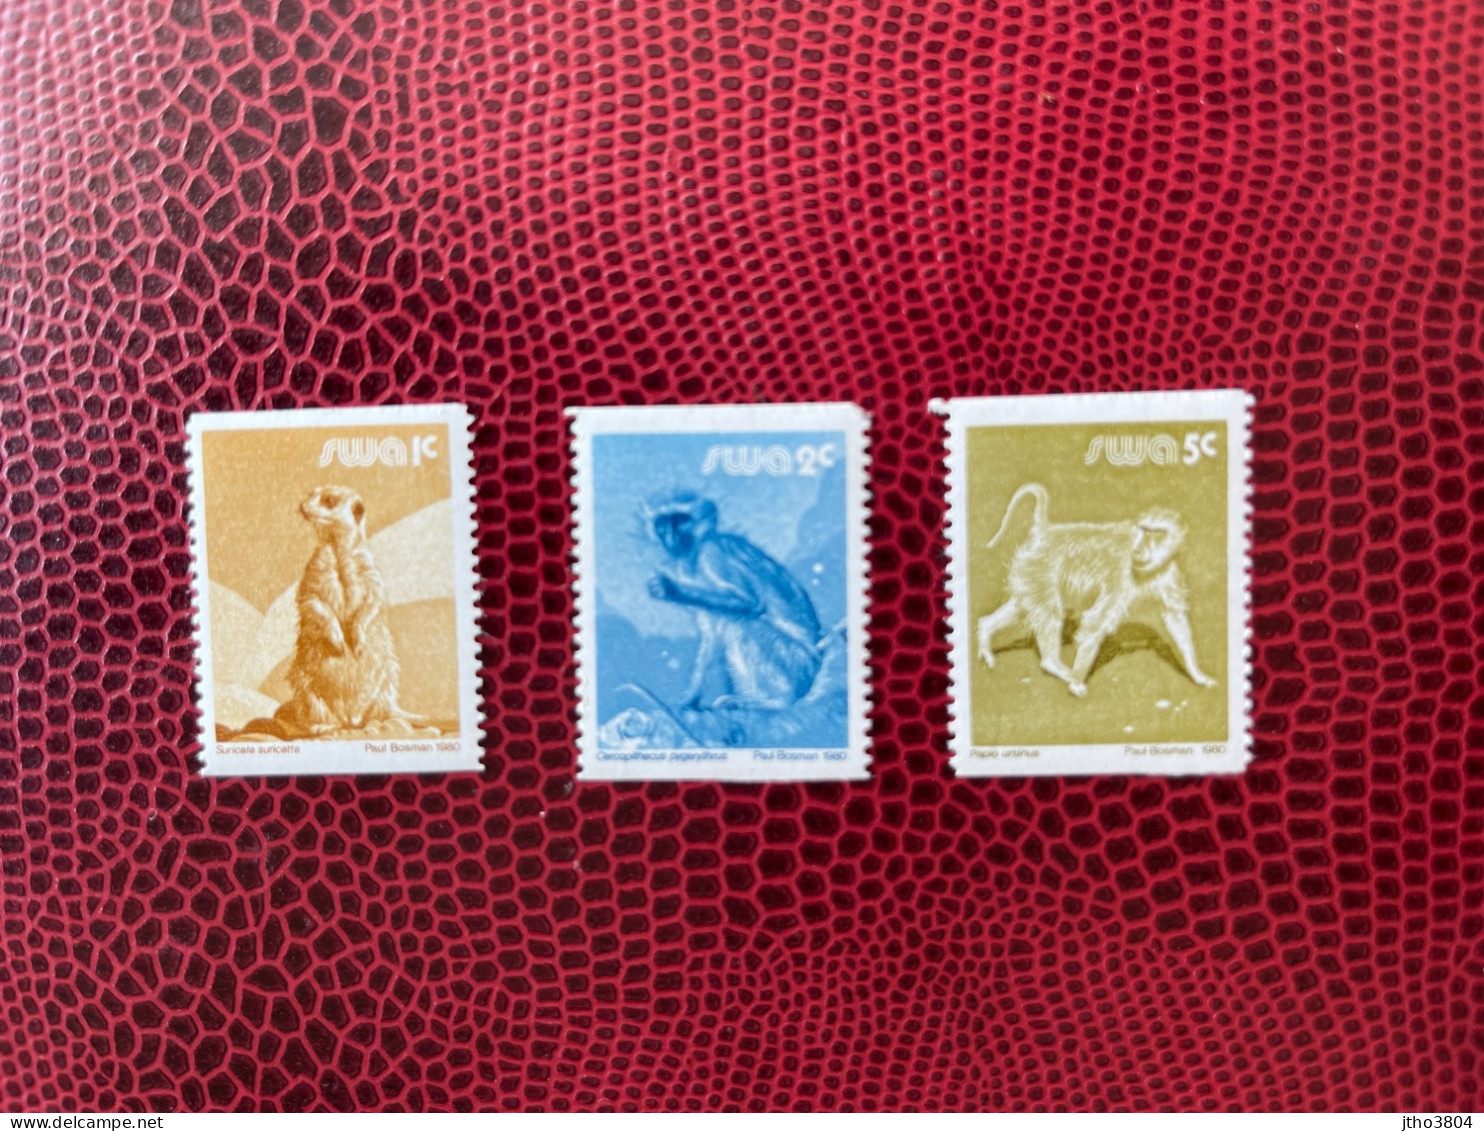 SWA 1980 SUD OUEST AFRICAIN 3v Neuf MNH ** Mi YT 450 452 Mamíferos Mammals Säugetiere SOUTH WEST AFRICA - Singes